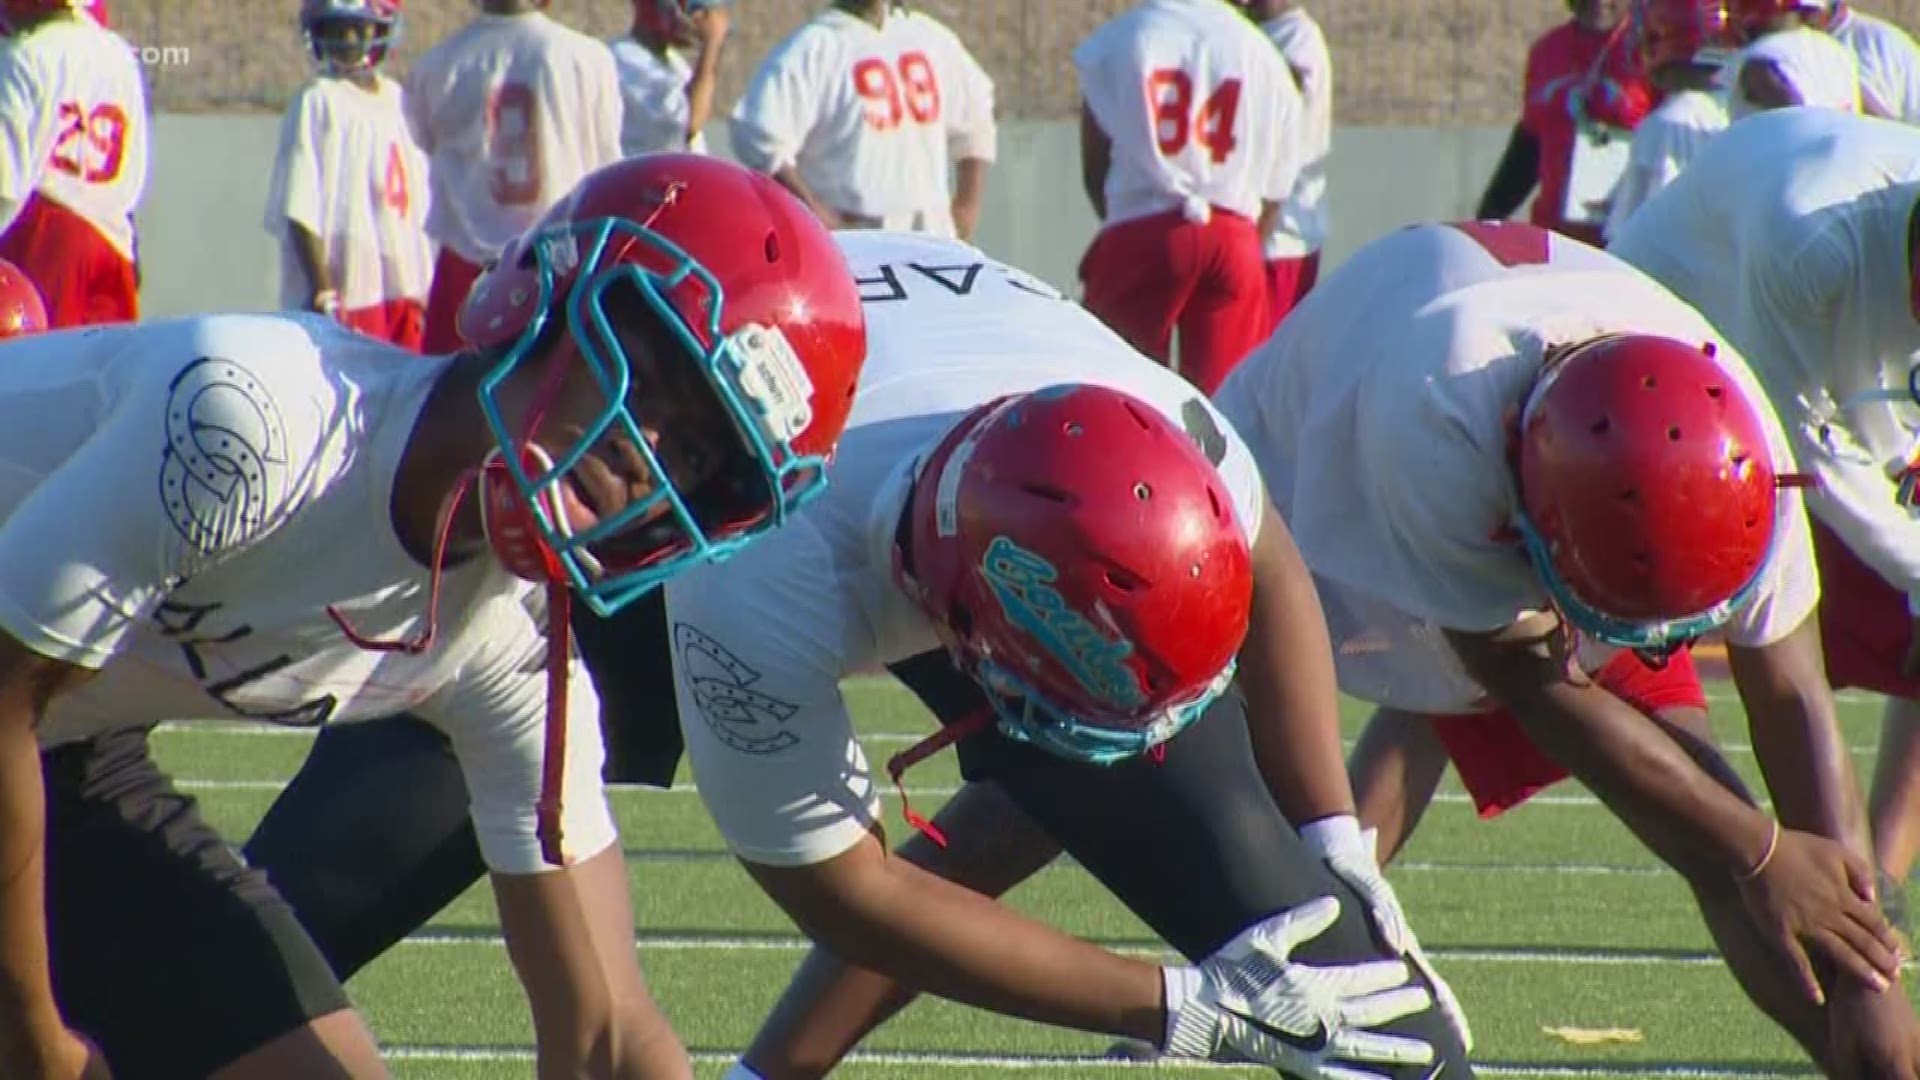 Football practice is back in schools across the DFW. This year, there is a new focus on safety through a different method of tackling.
